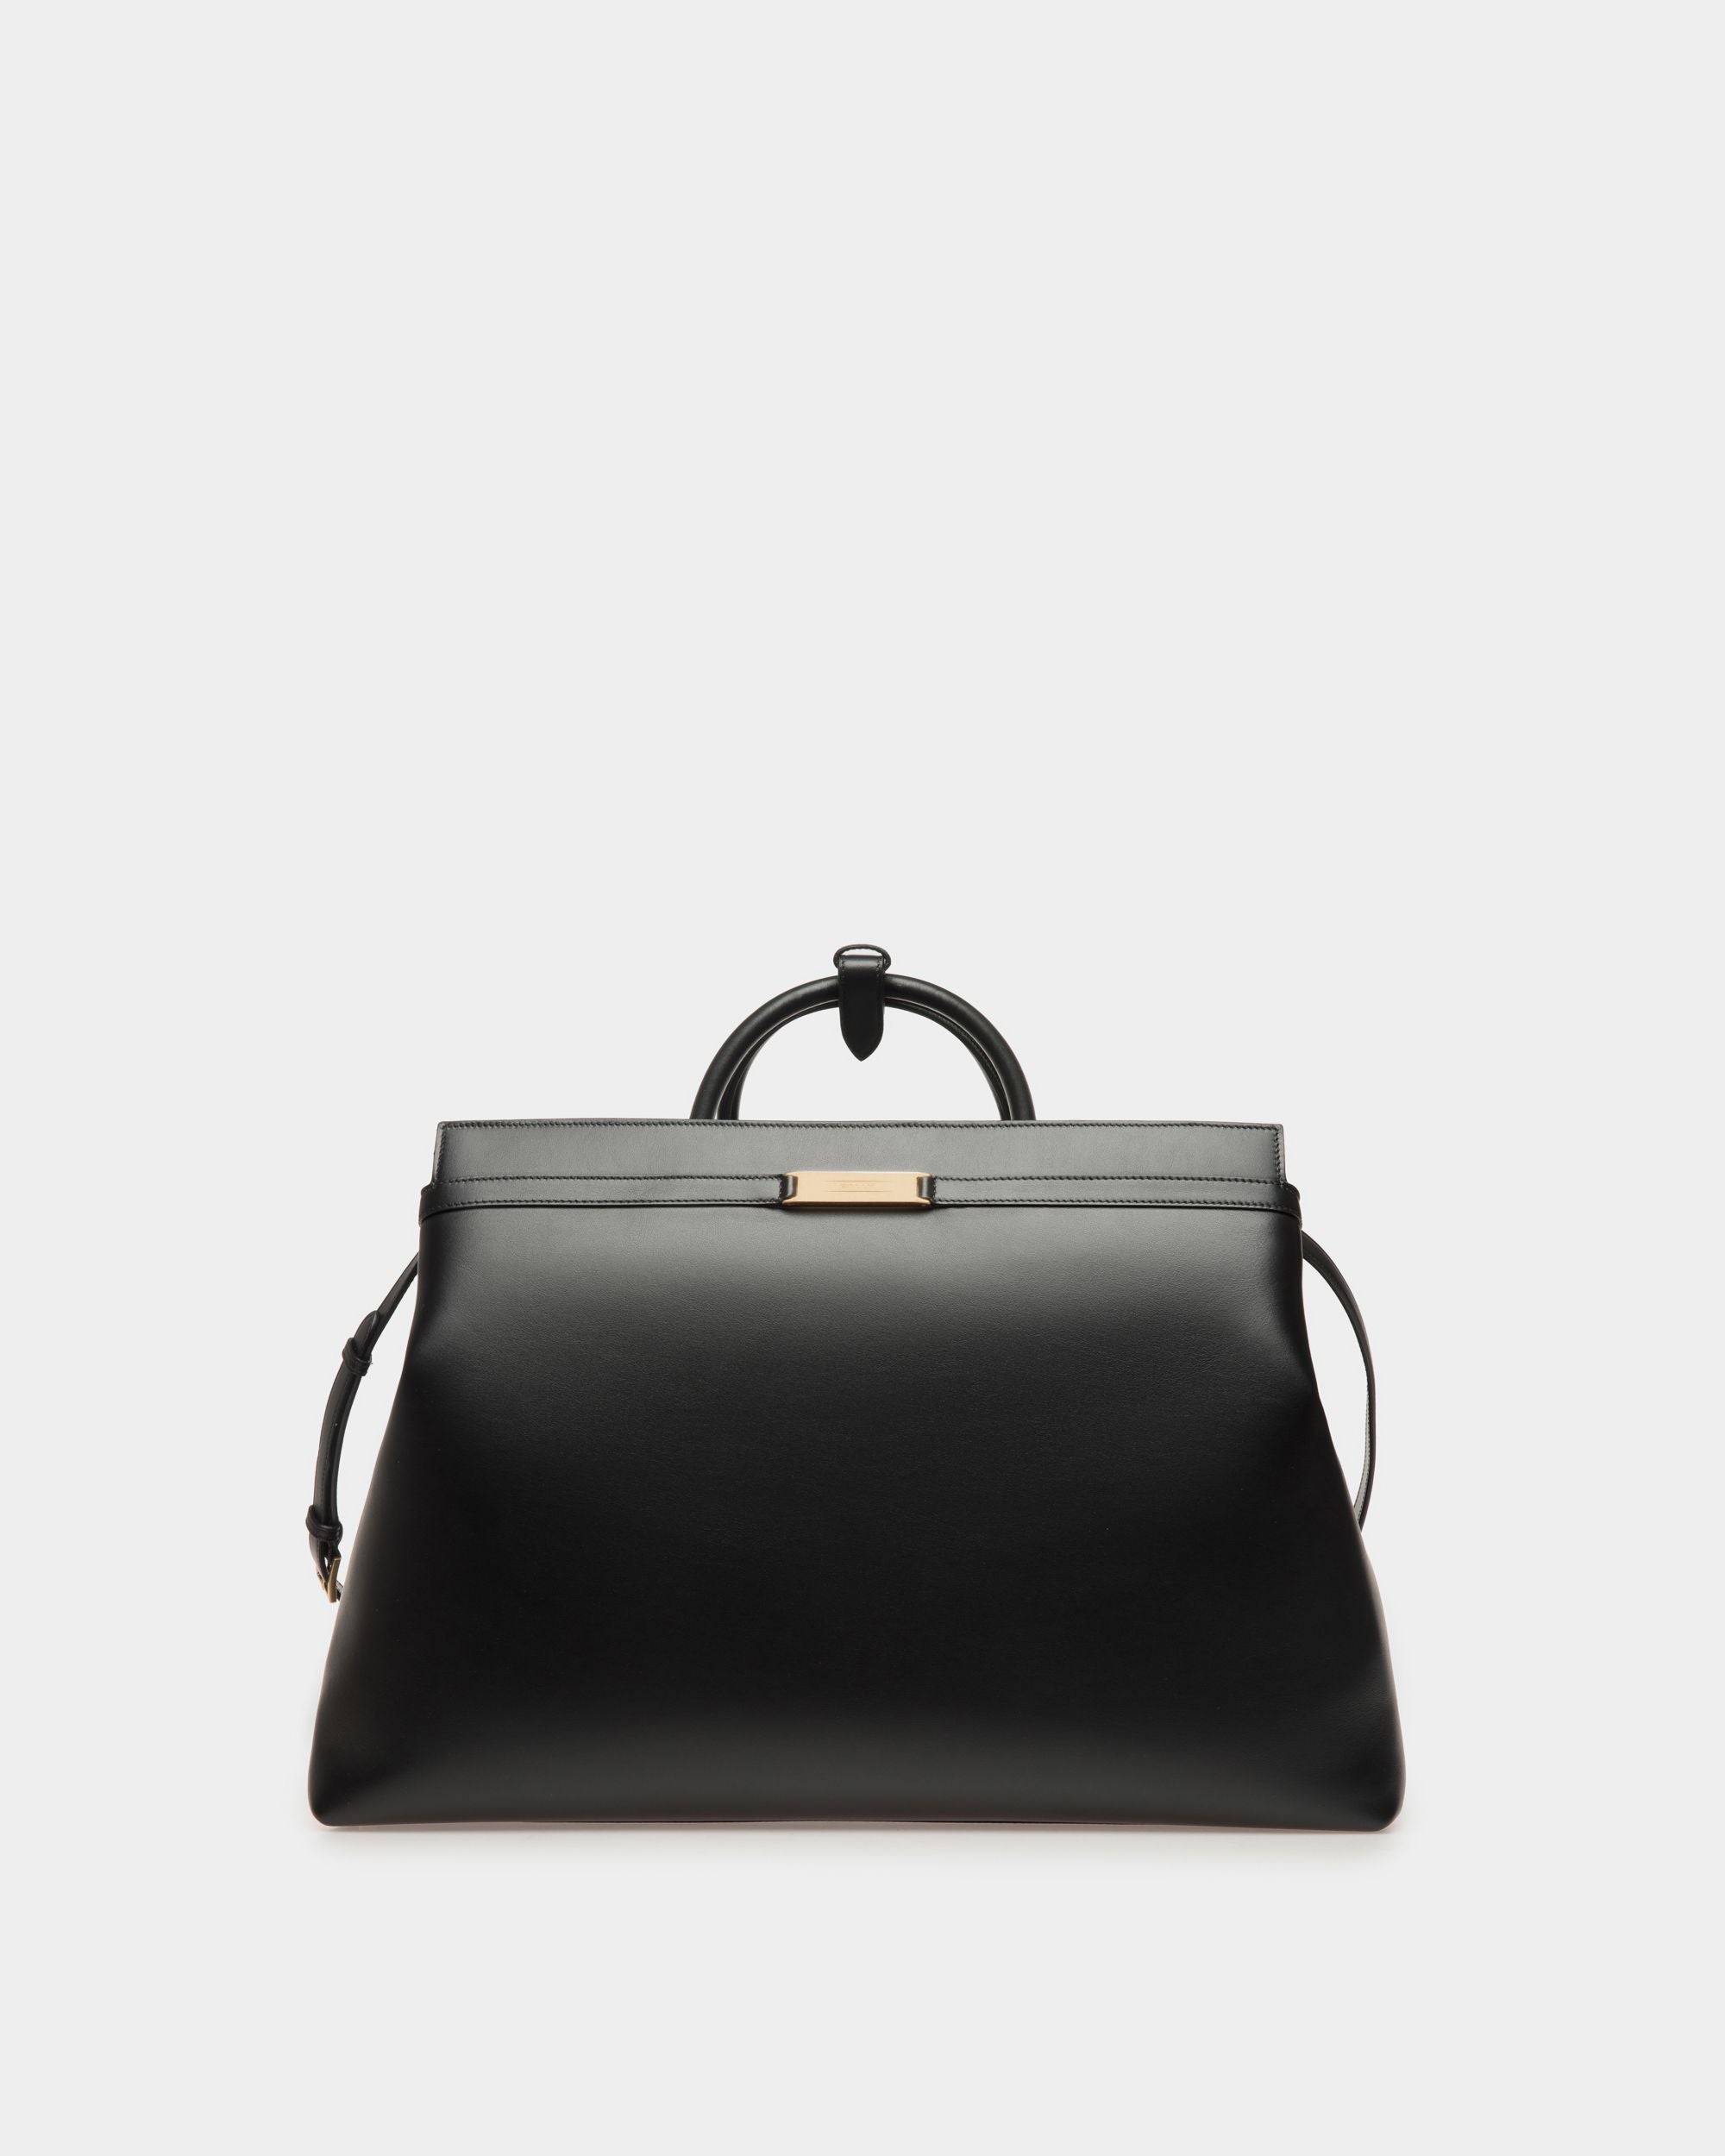 Deco | Men's Weekender in Black Leather | Bally | Still Life Front